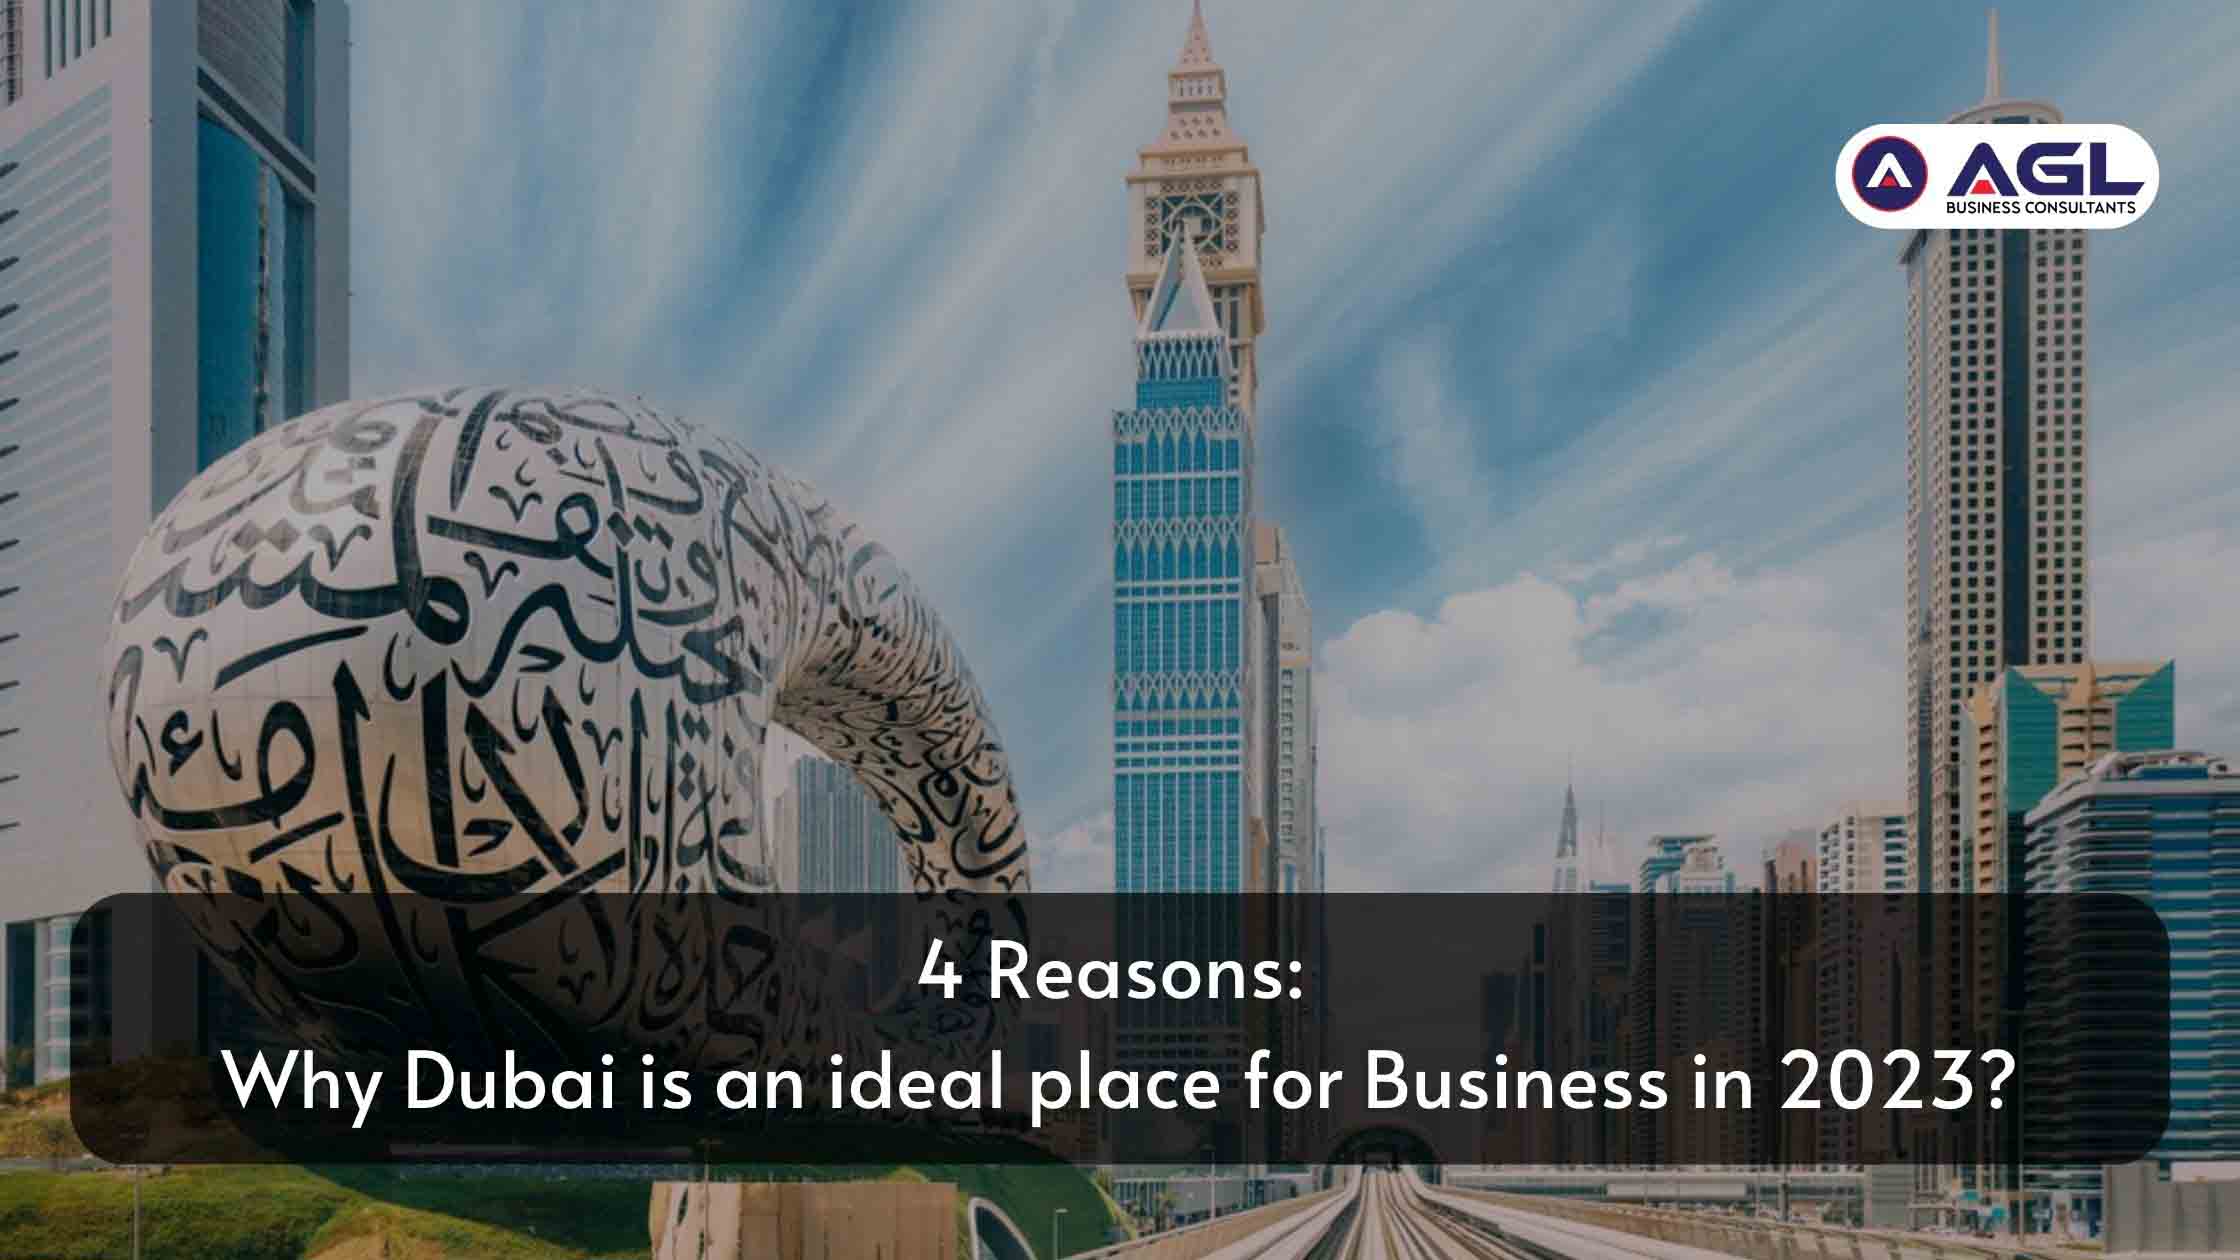 4 Reasons: Why Dubai is an ideal place for Business in 2023?